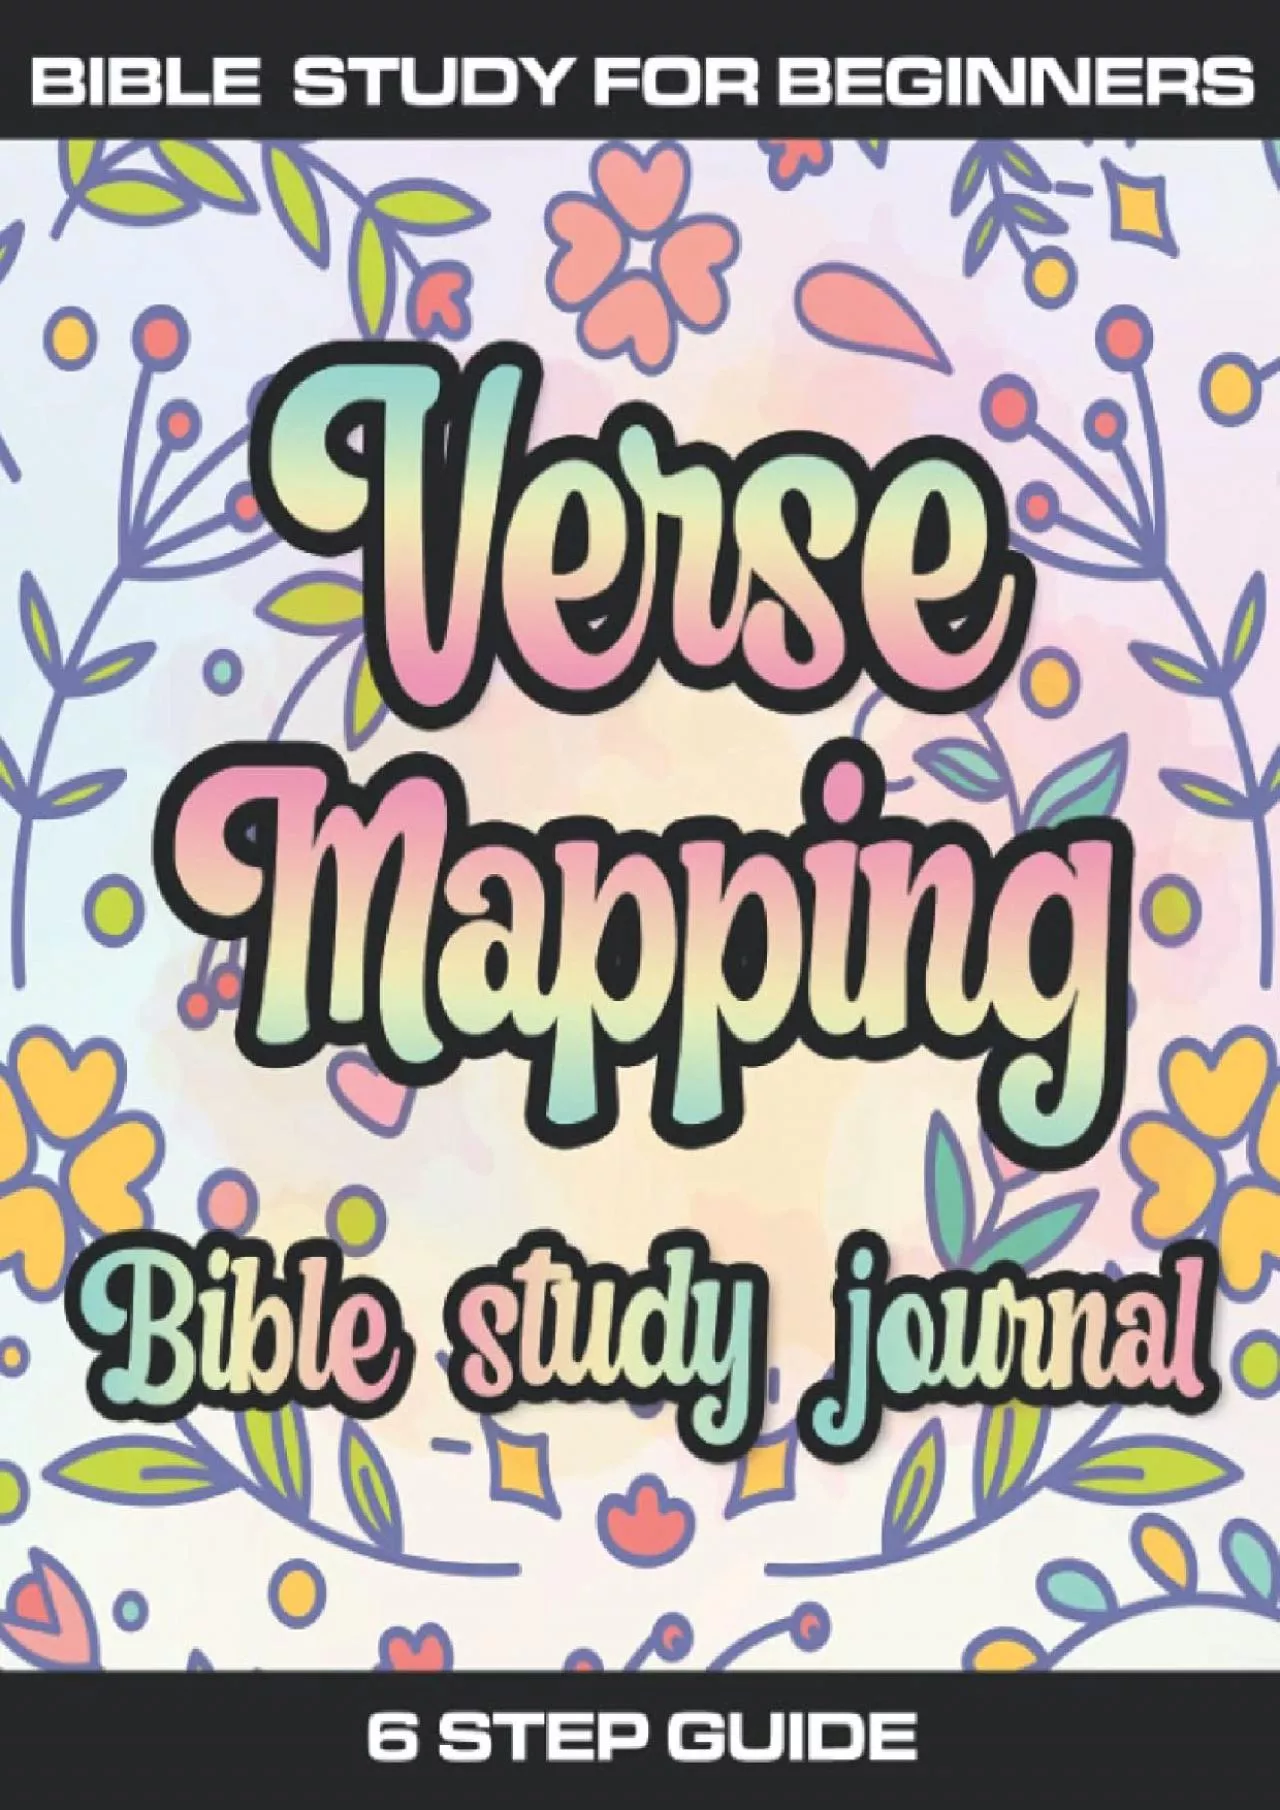 [EBOOK] Verse Mapping Bible Study Journal: Bible Study for Beginners 6 steps to a deeper